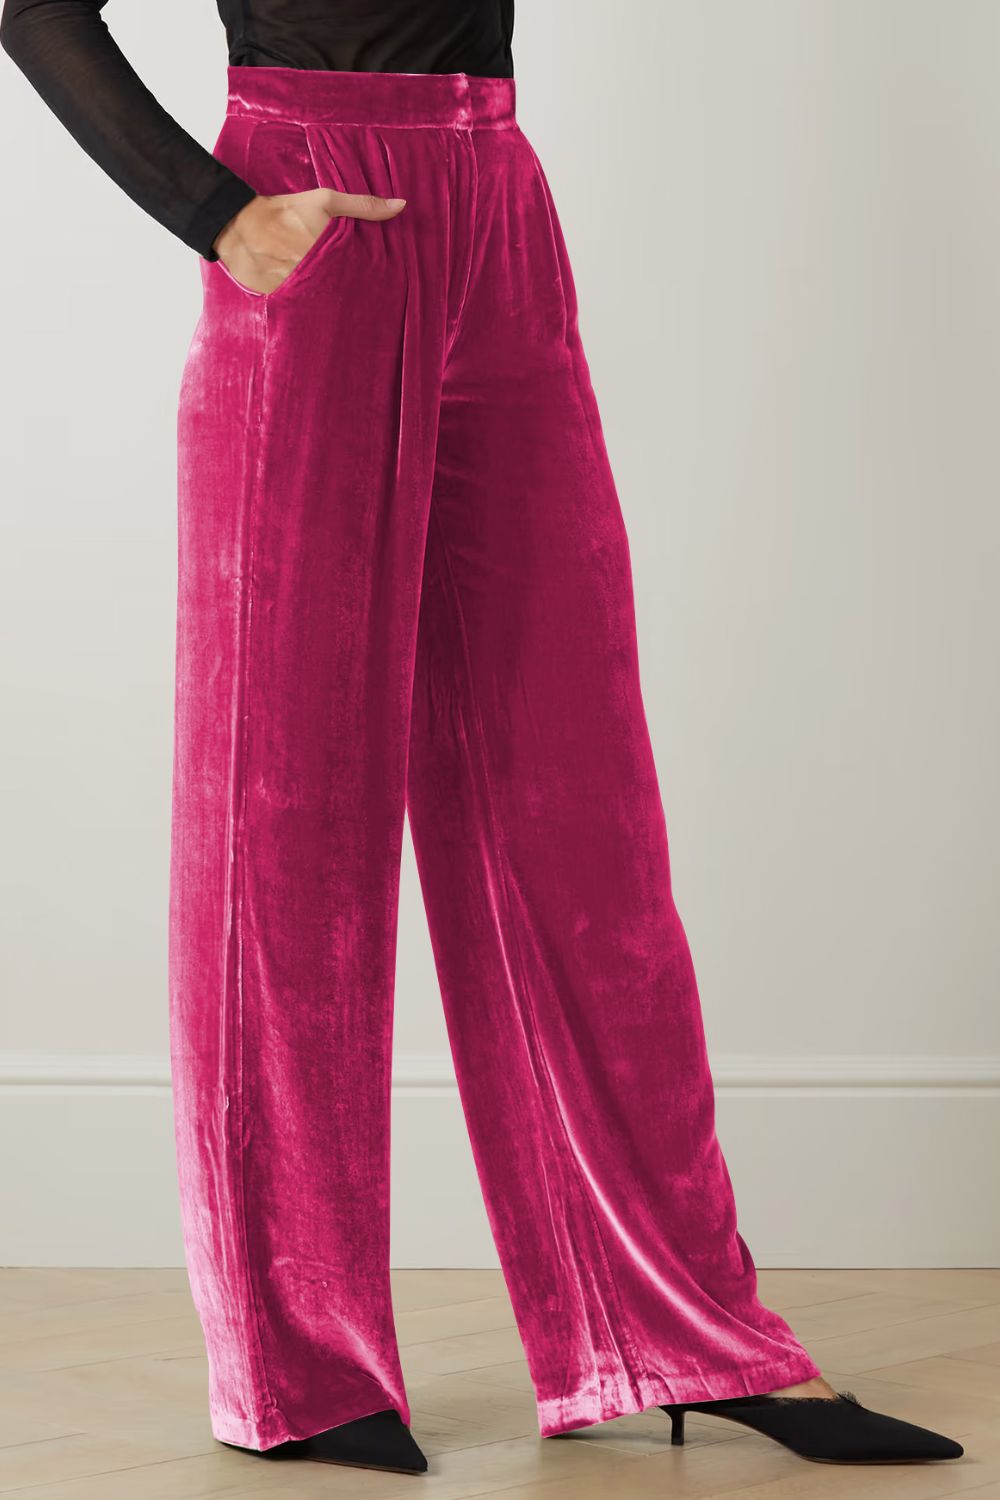 Loose Fit High Waist Long Pants with Pockets - Bottoms - Pants - 11 - 2024